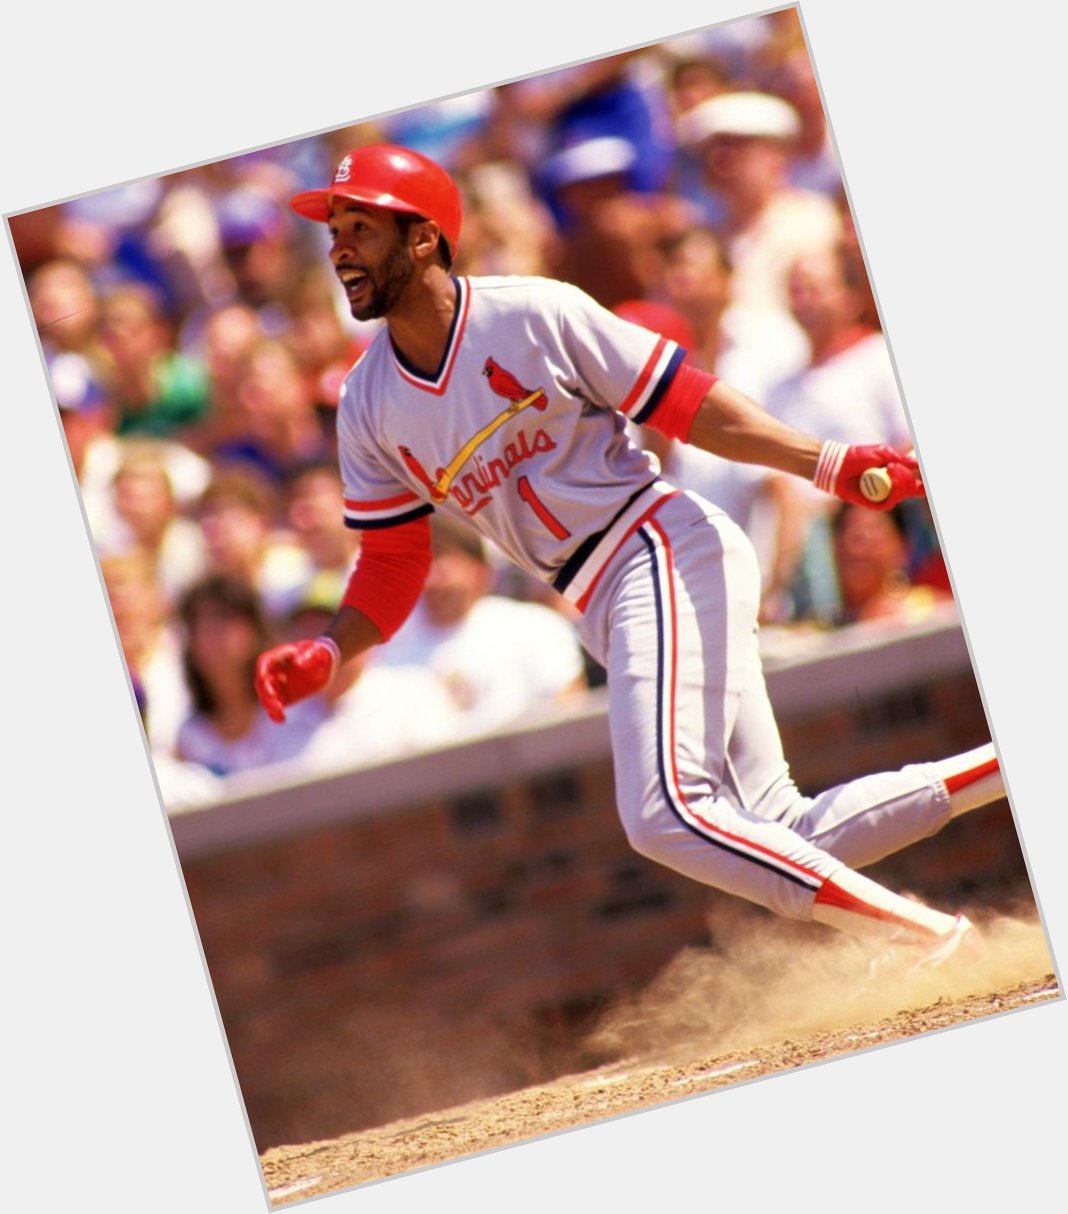 Happy Birthday to Hall of Fame Shortstop Ozzie Smith who turns 66 today. 